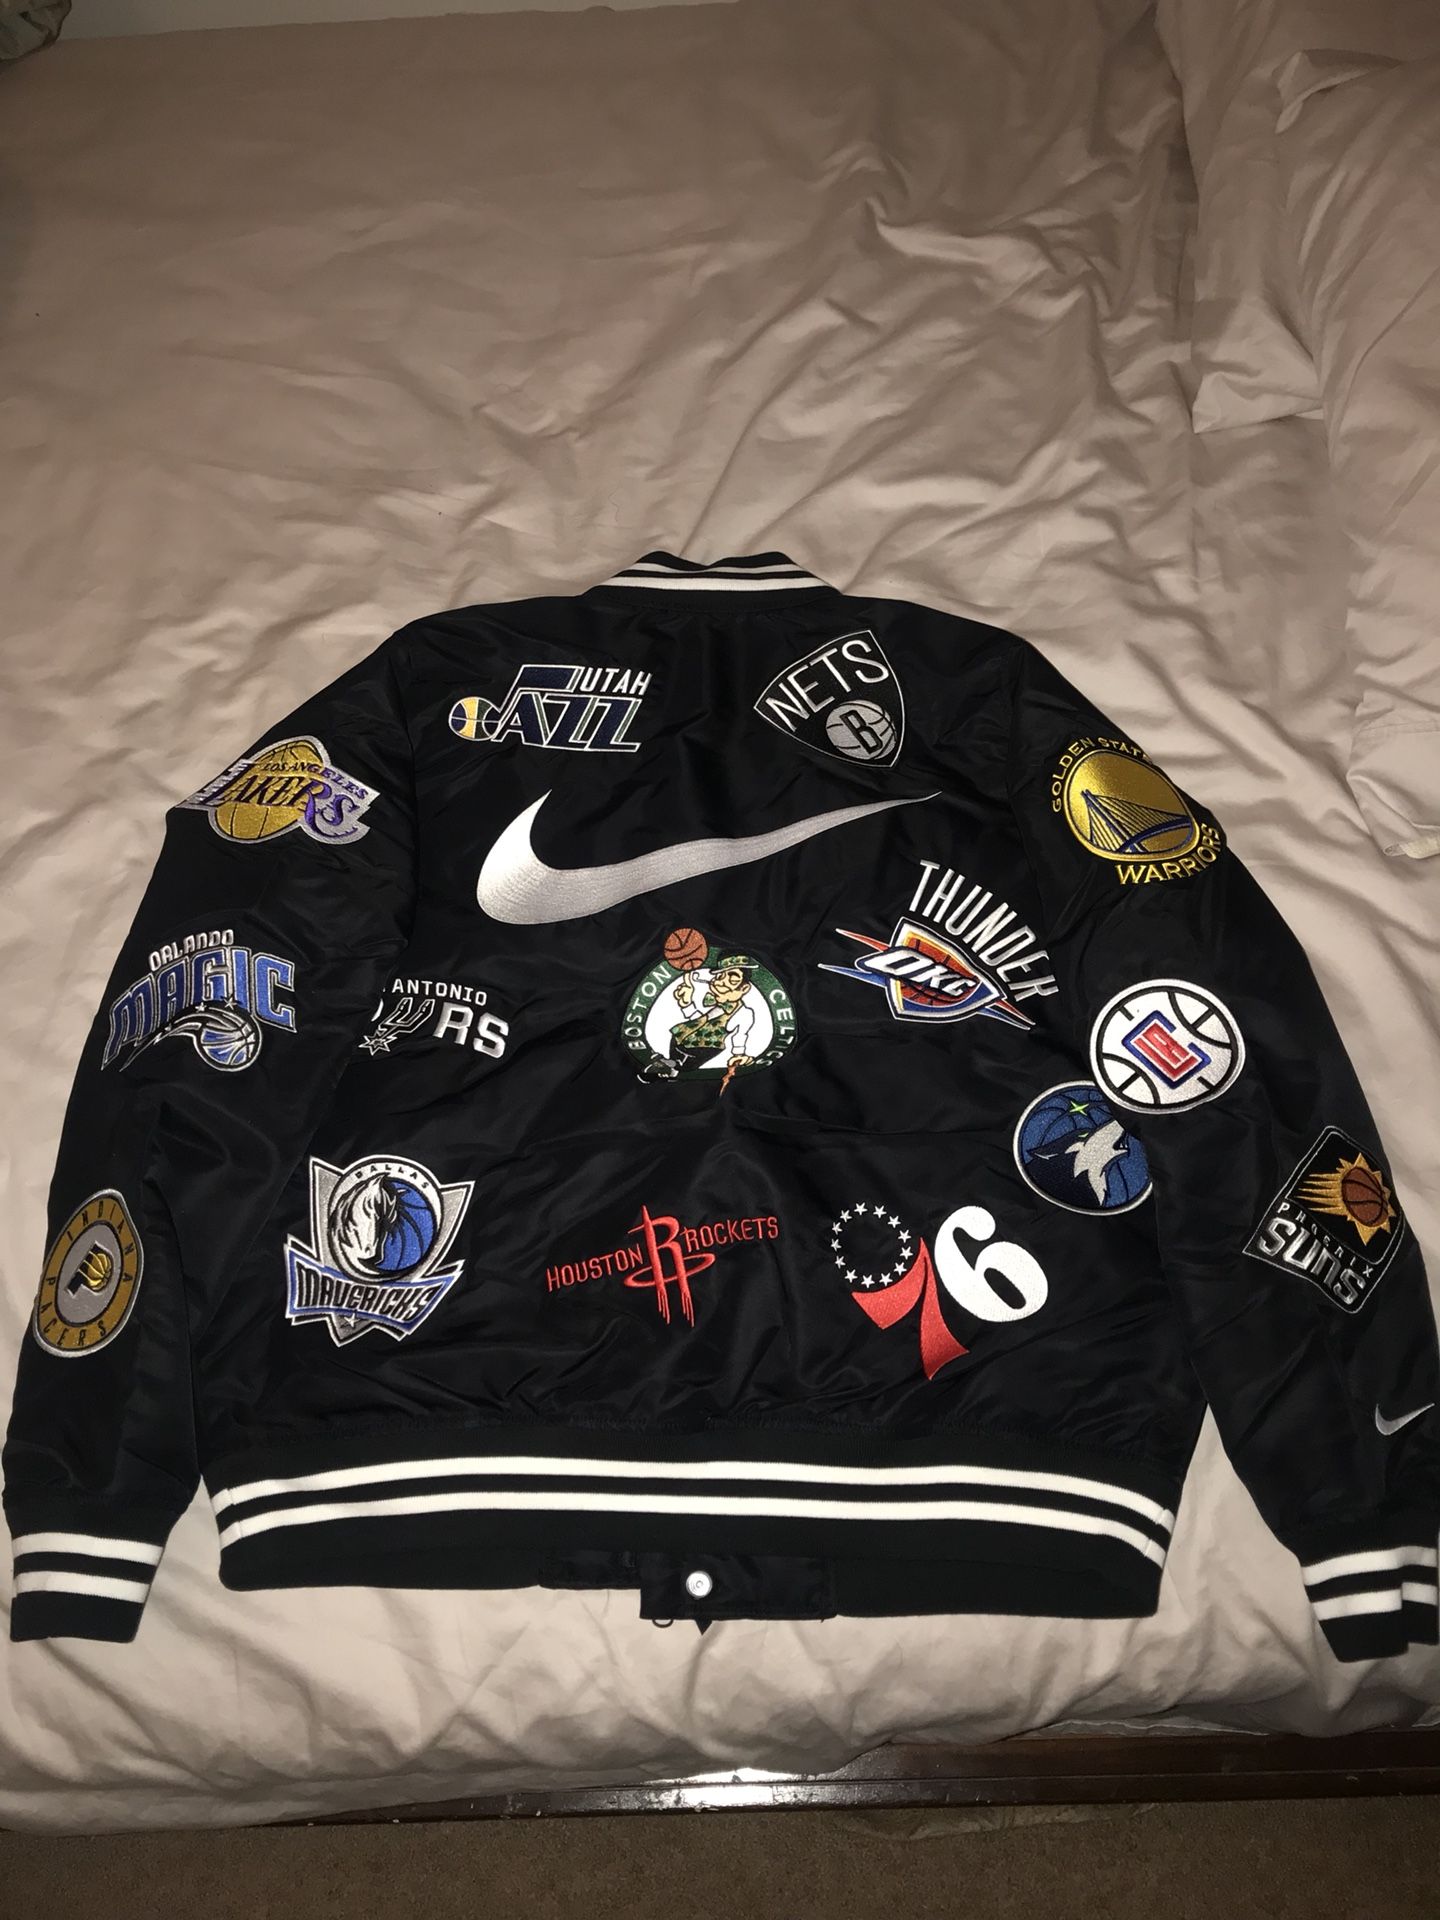 Supreme x Nike NBA Warm-Up Jacket LARGE for Sale in Los Angeles